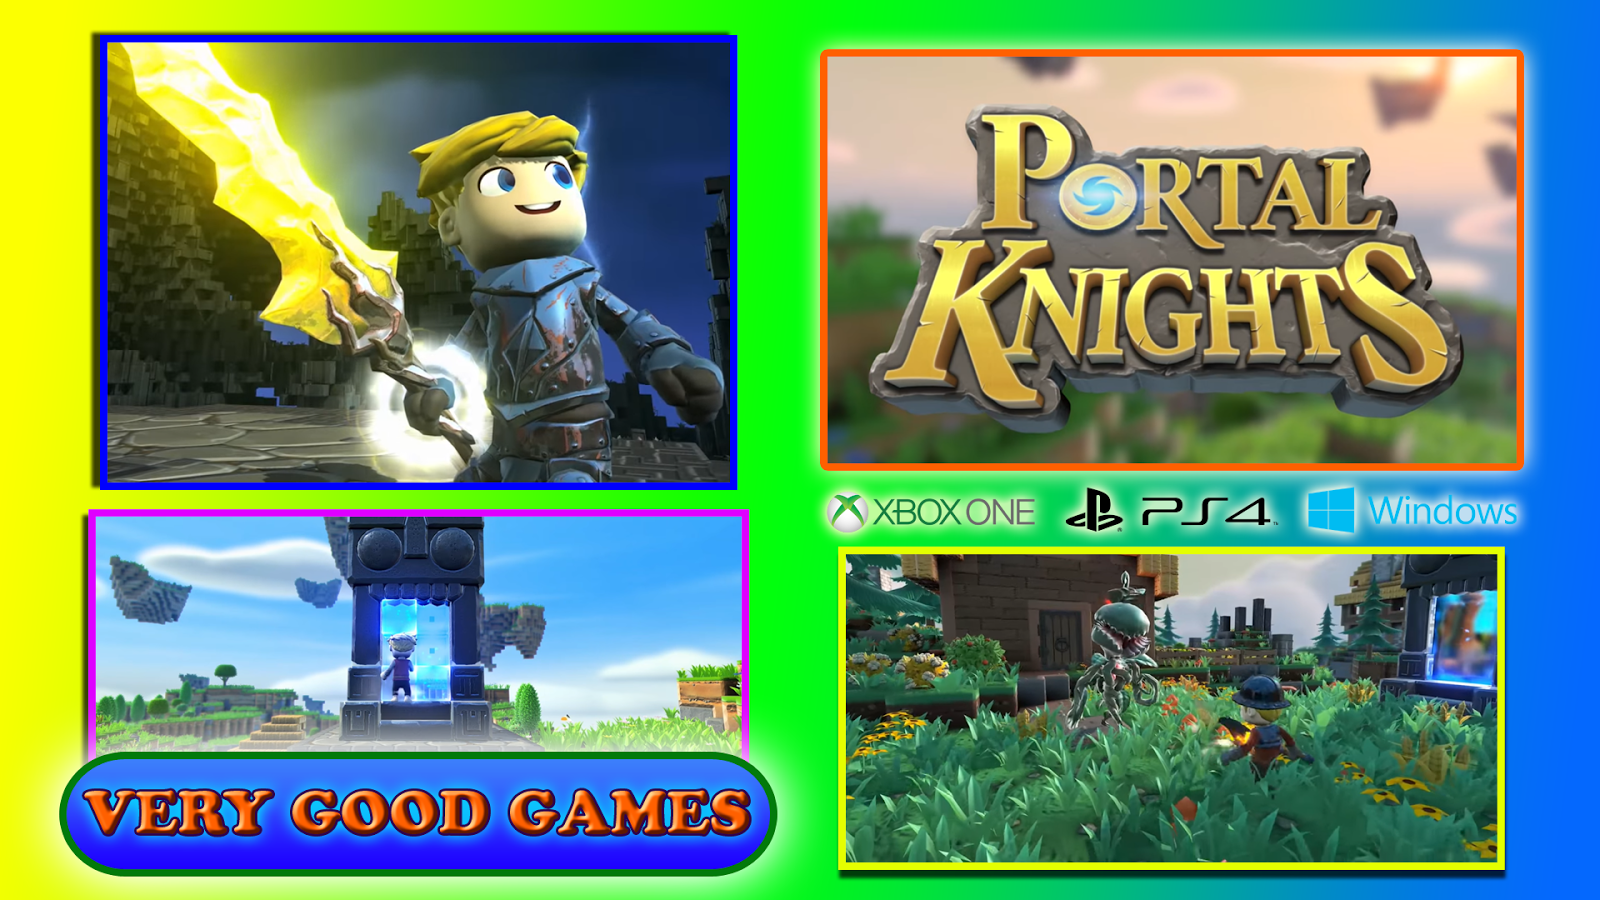 A screenshots of Portal Knights - an RPG sandbox game for PlayStation 4 and Xbox One game consoles, for Windows computers